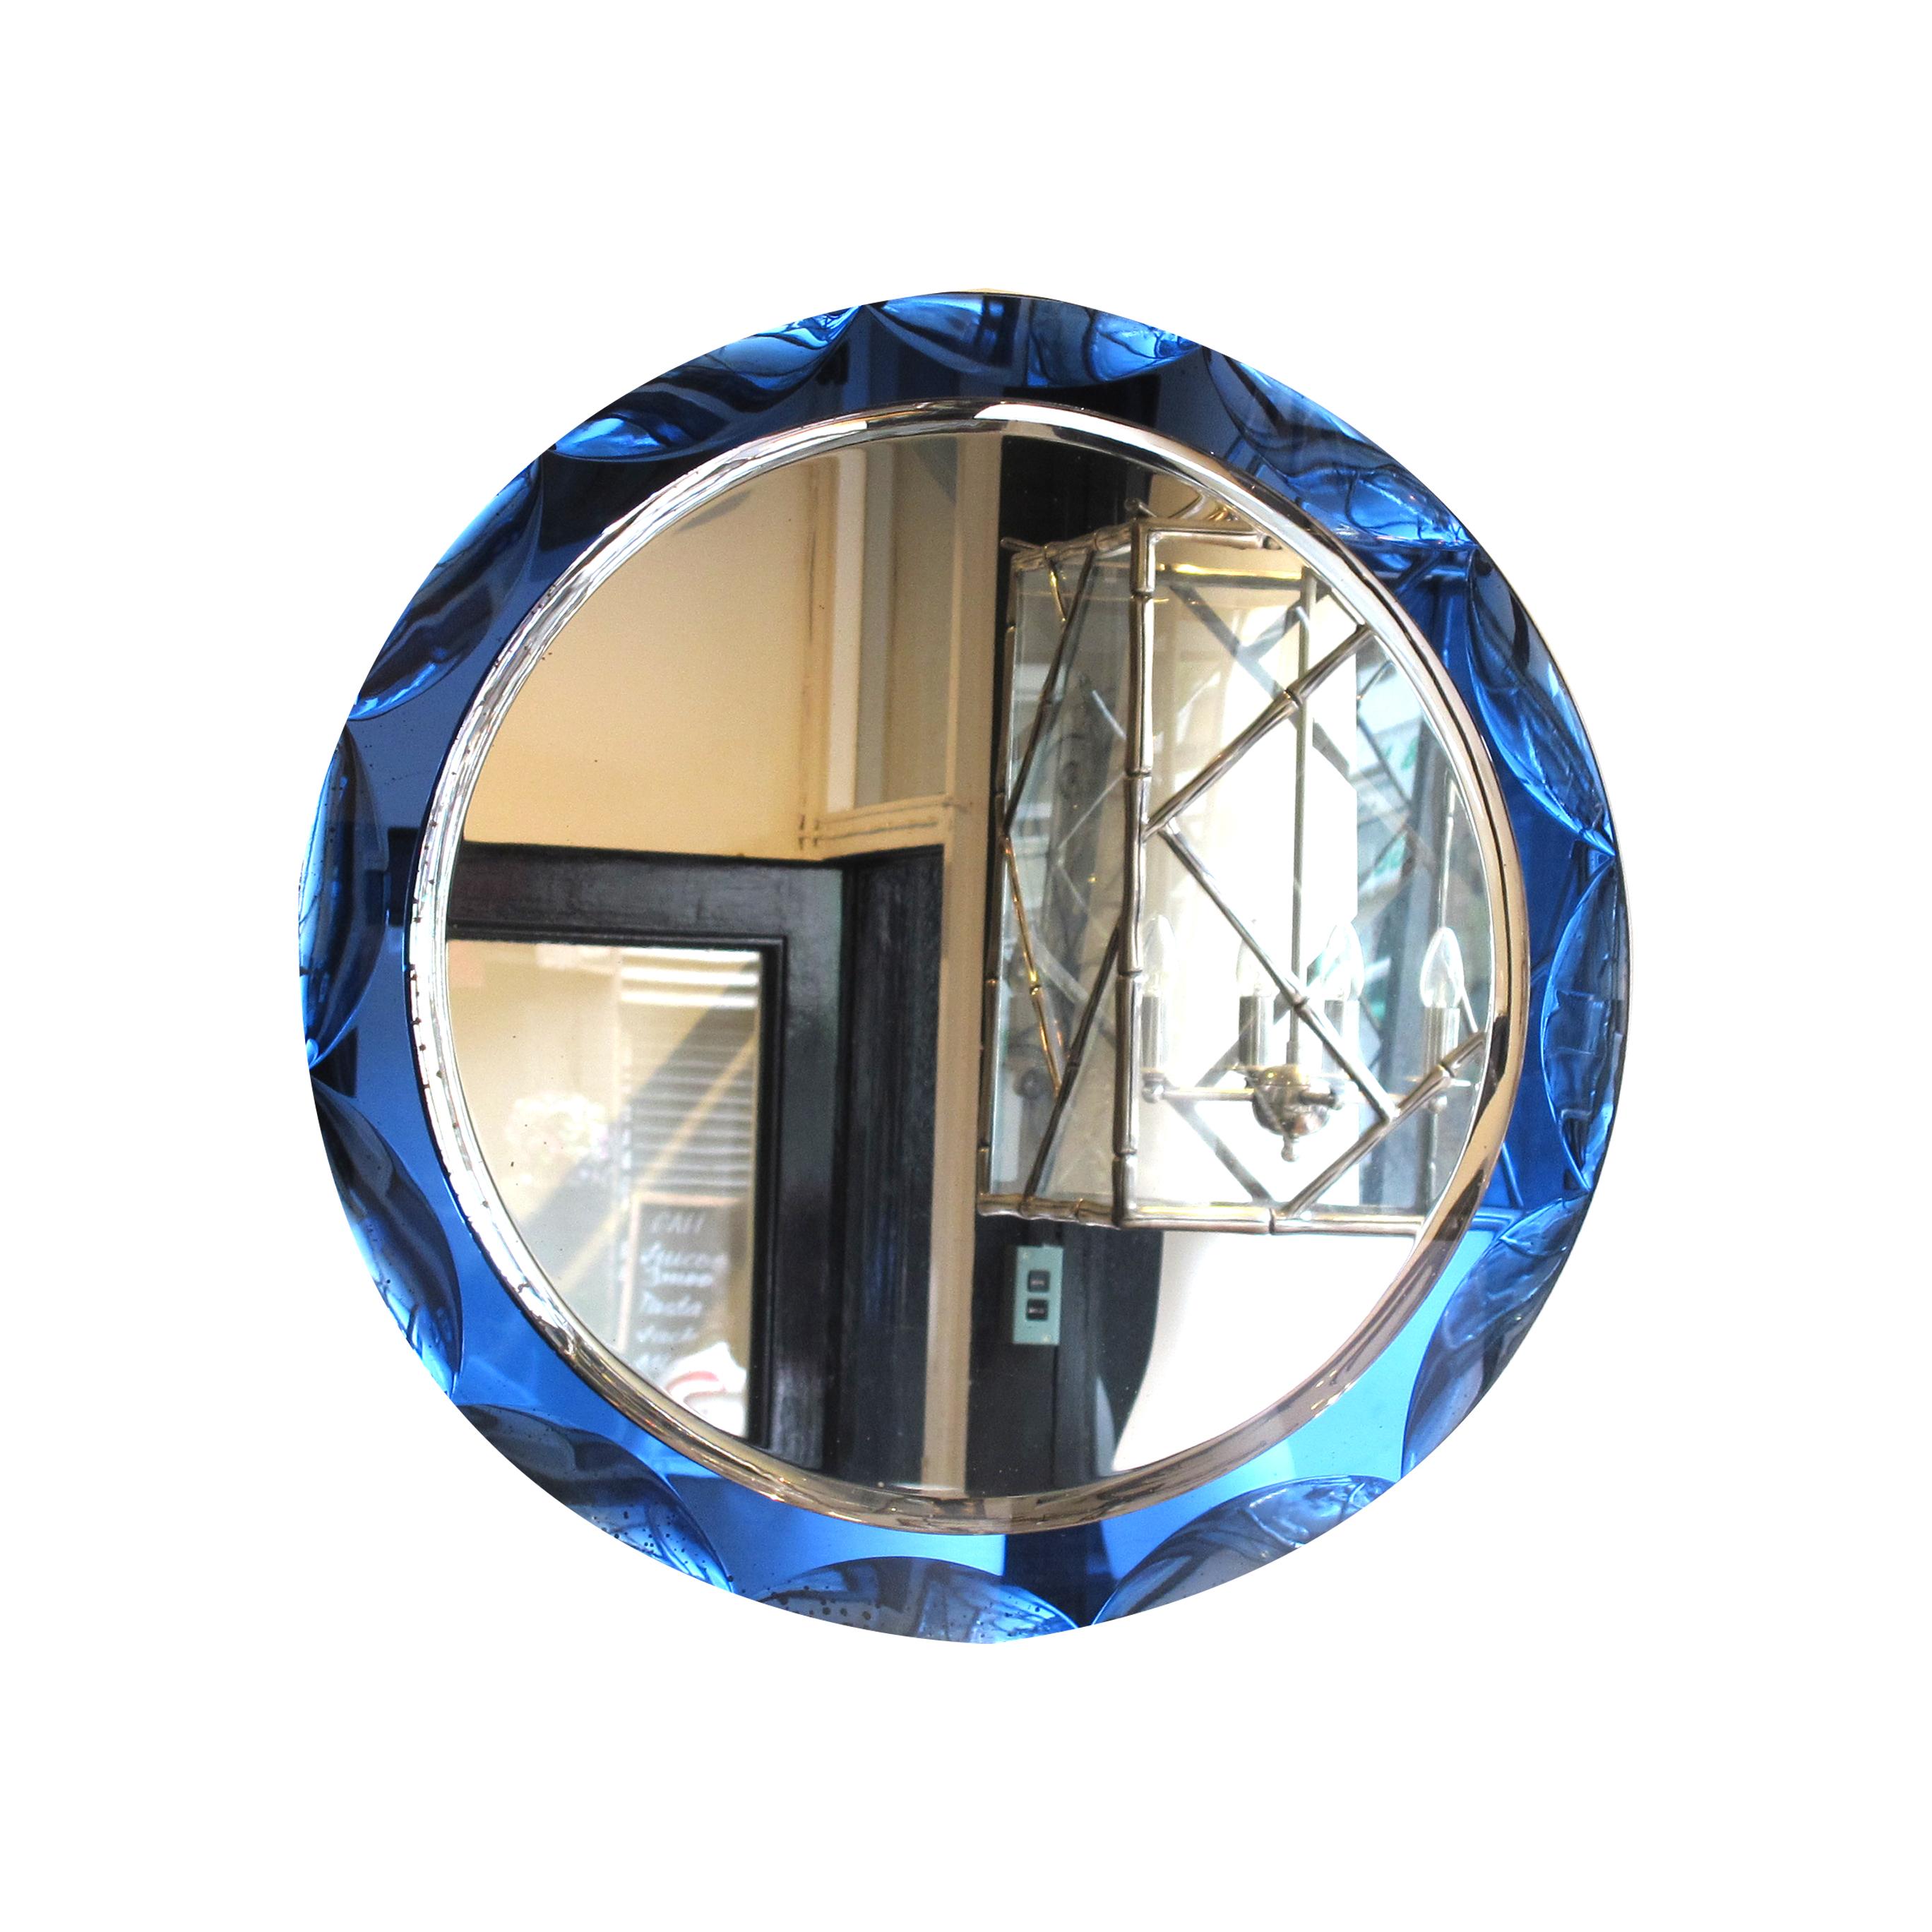 Stunning 1960s round mirror with semi-circles and a deep blue mirrored frame. The mirror features a circular shape with a large, bevelled edge that gives it a three-dimensional appearance. The outer frame is made of deep blue mirrored glass, adding